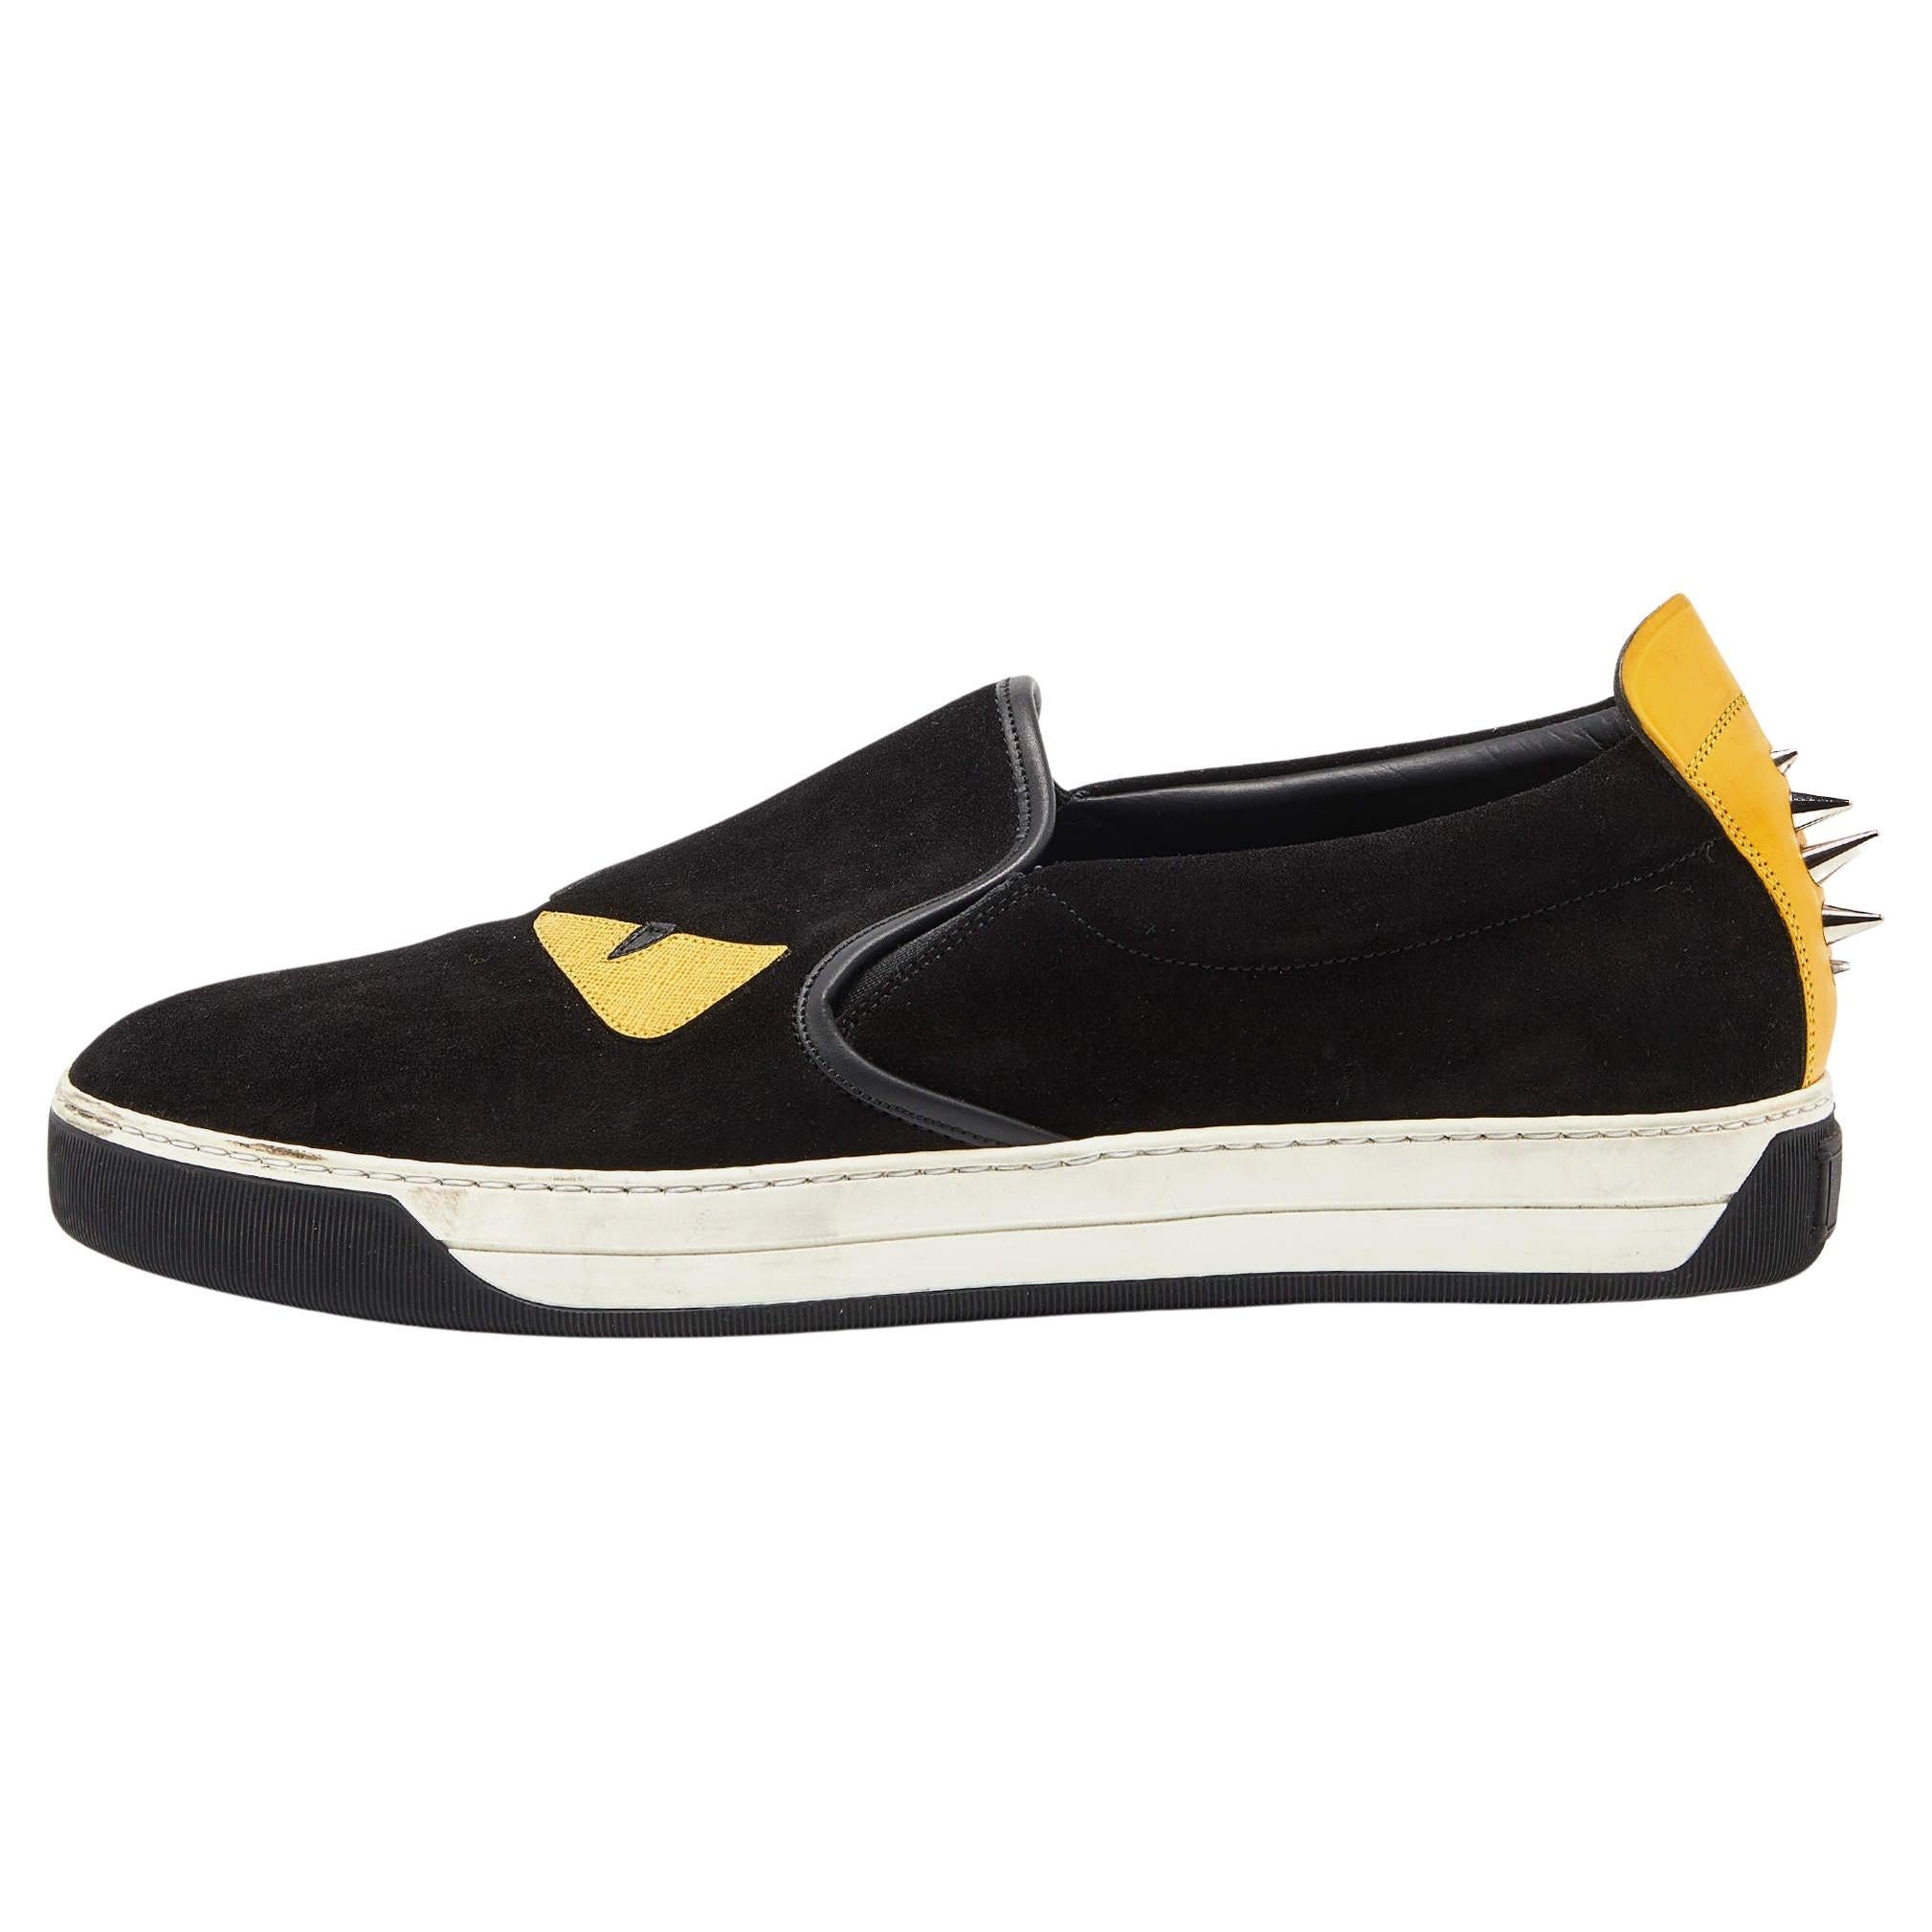 Fendi Black/Yellow Suede and Leather Monster Eyes Slip On Sneakers Size 44